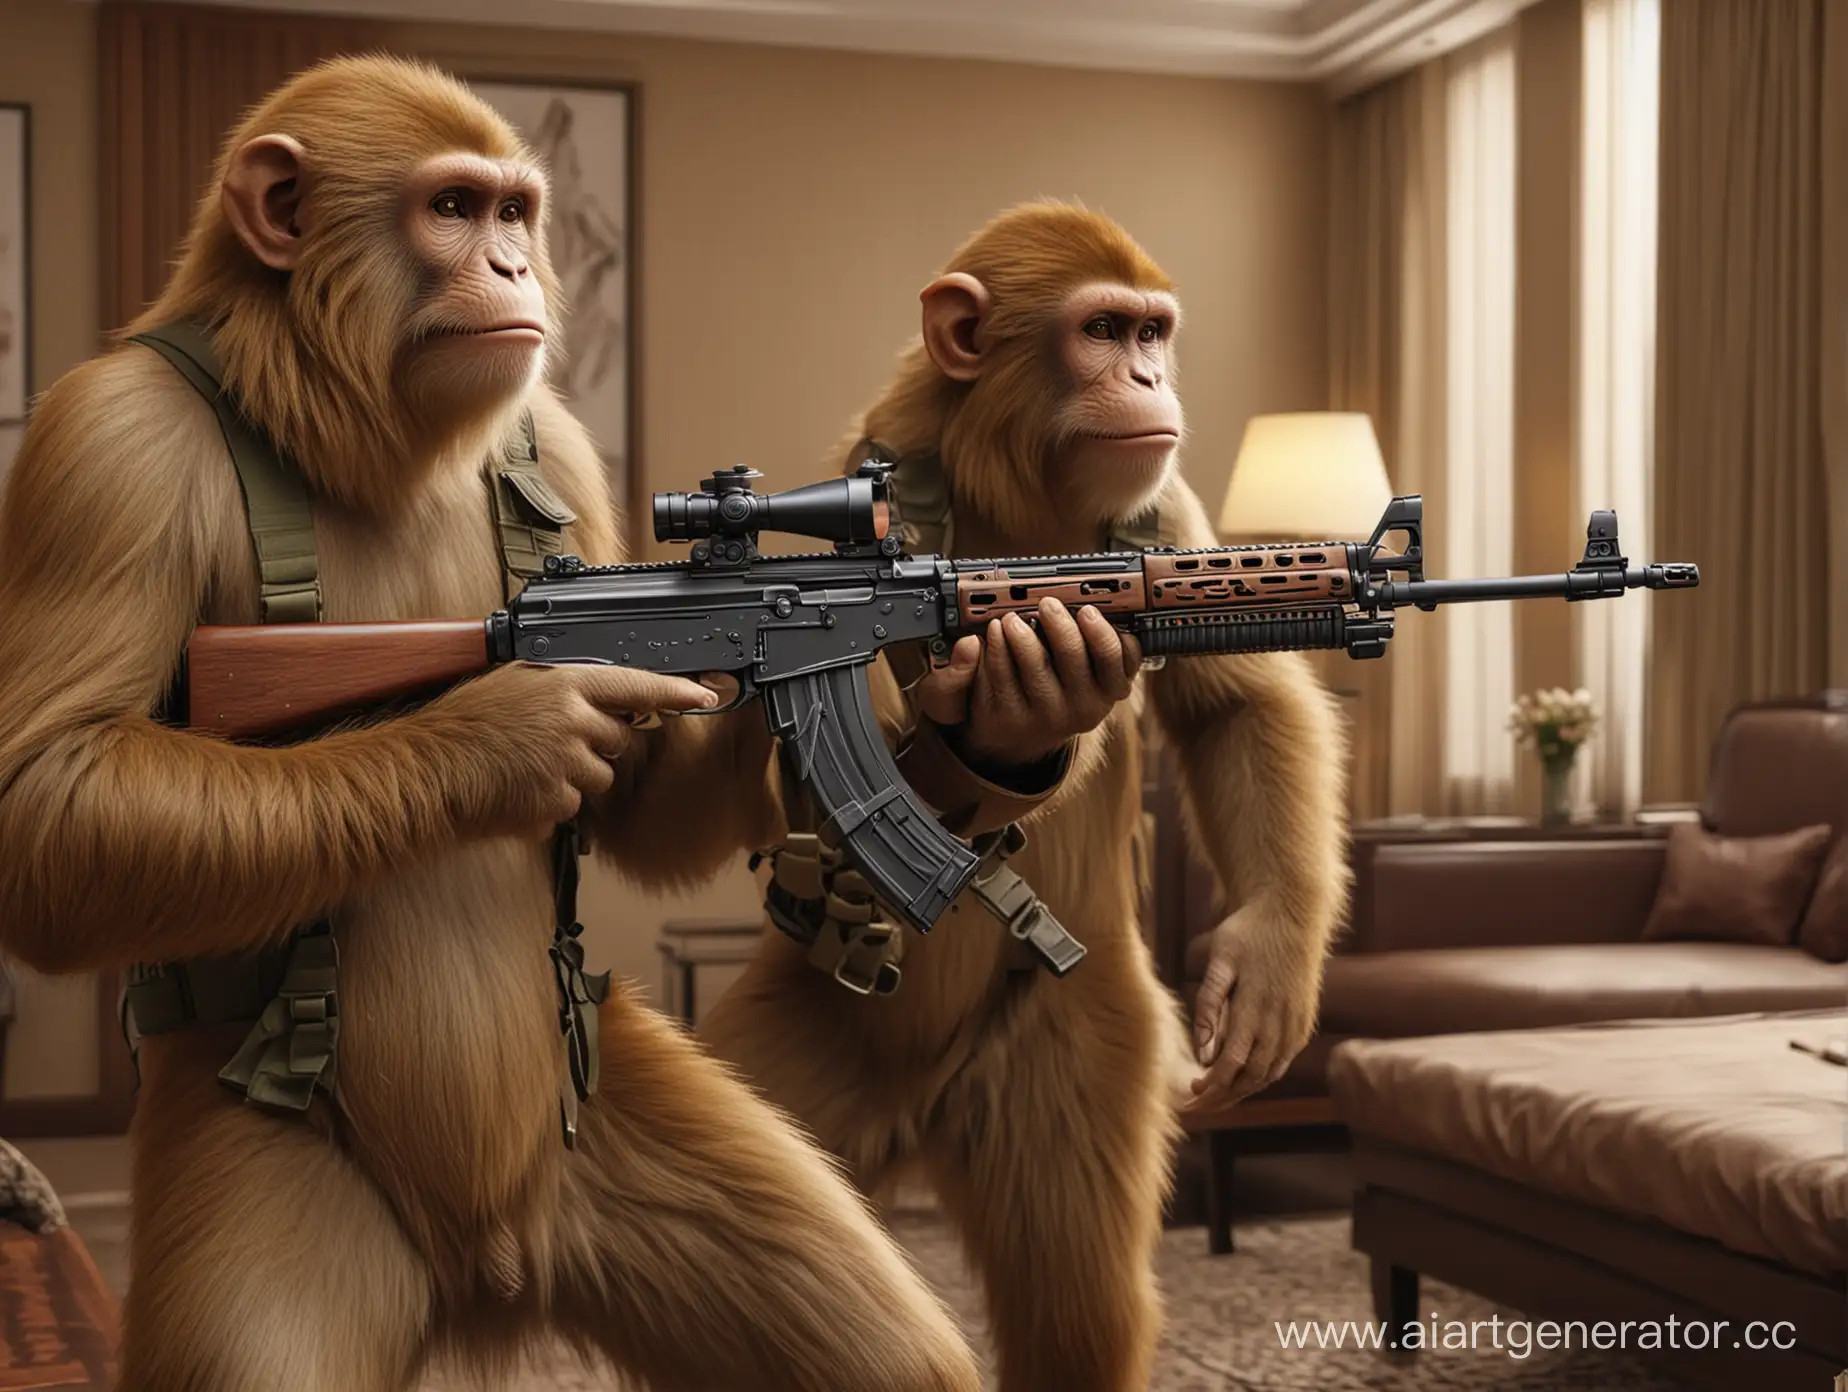 Monkeys-in-Classic-Attire-Holding-AK-and-AR-Rifles-in-Asian-Hotel-Room